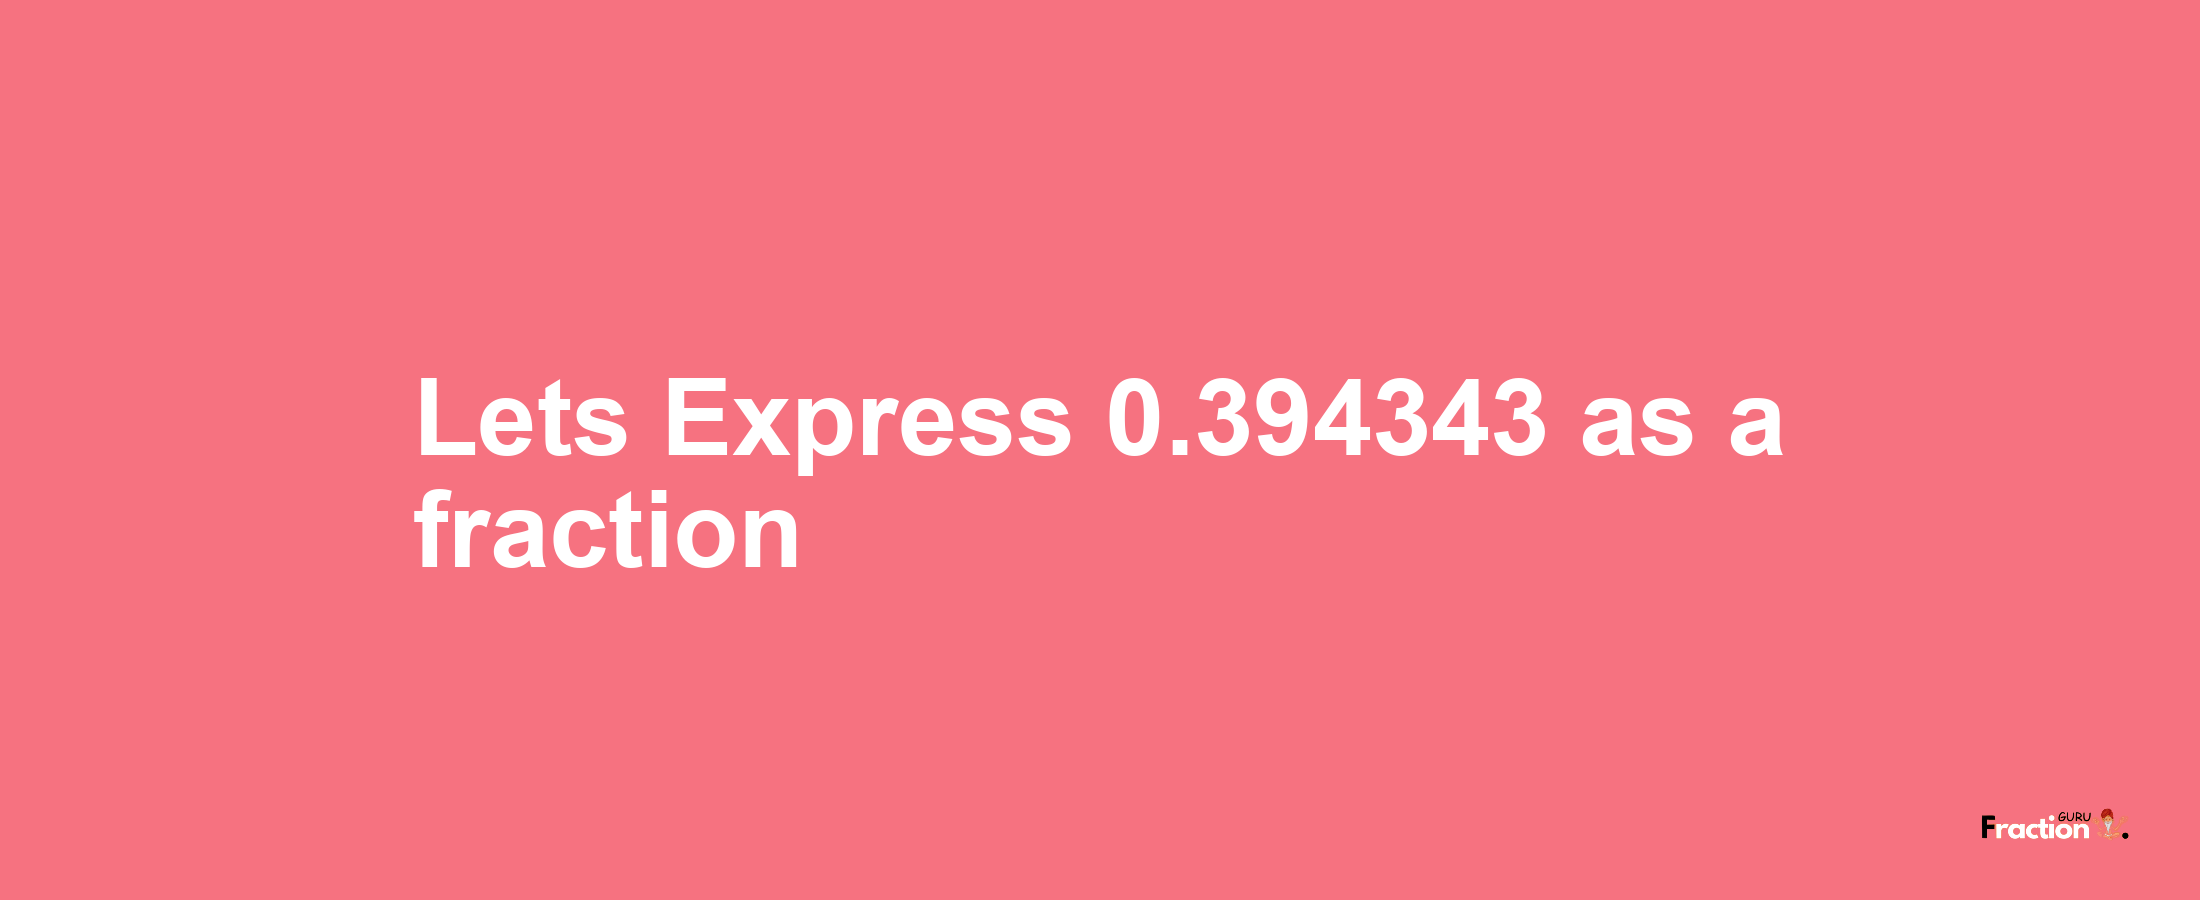 Lets Express 0.394343 as afraction